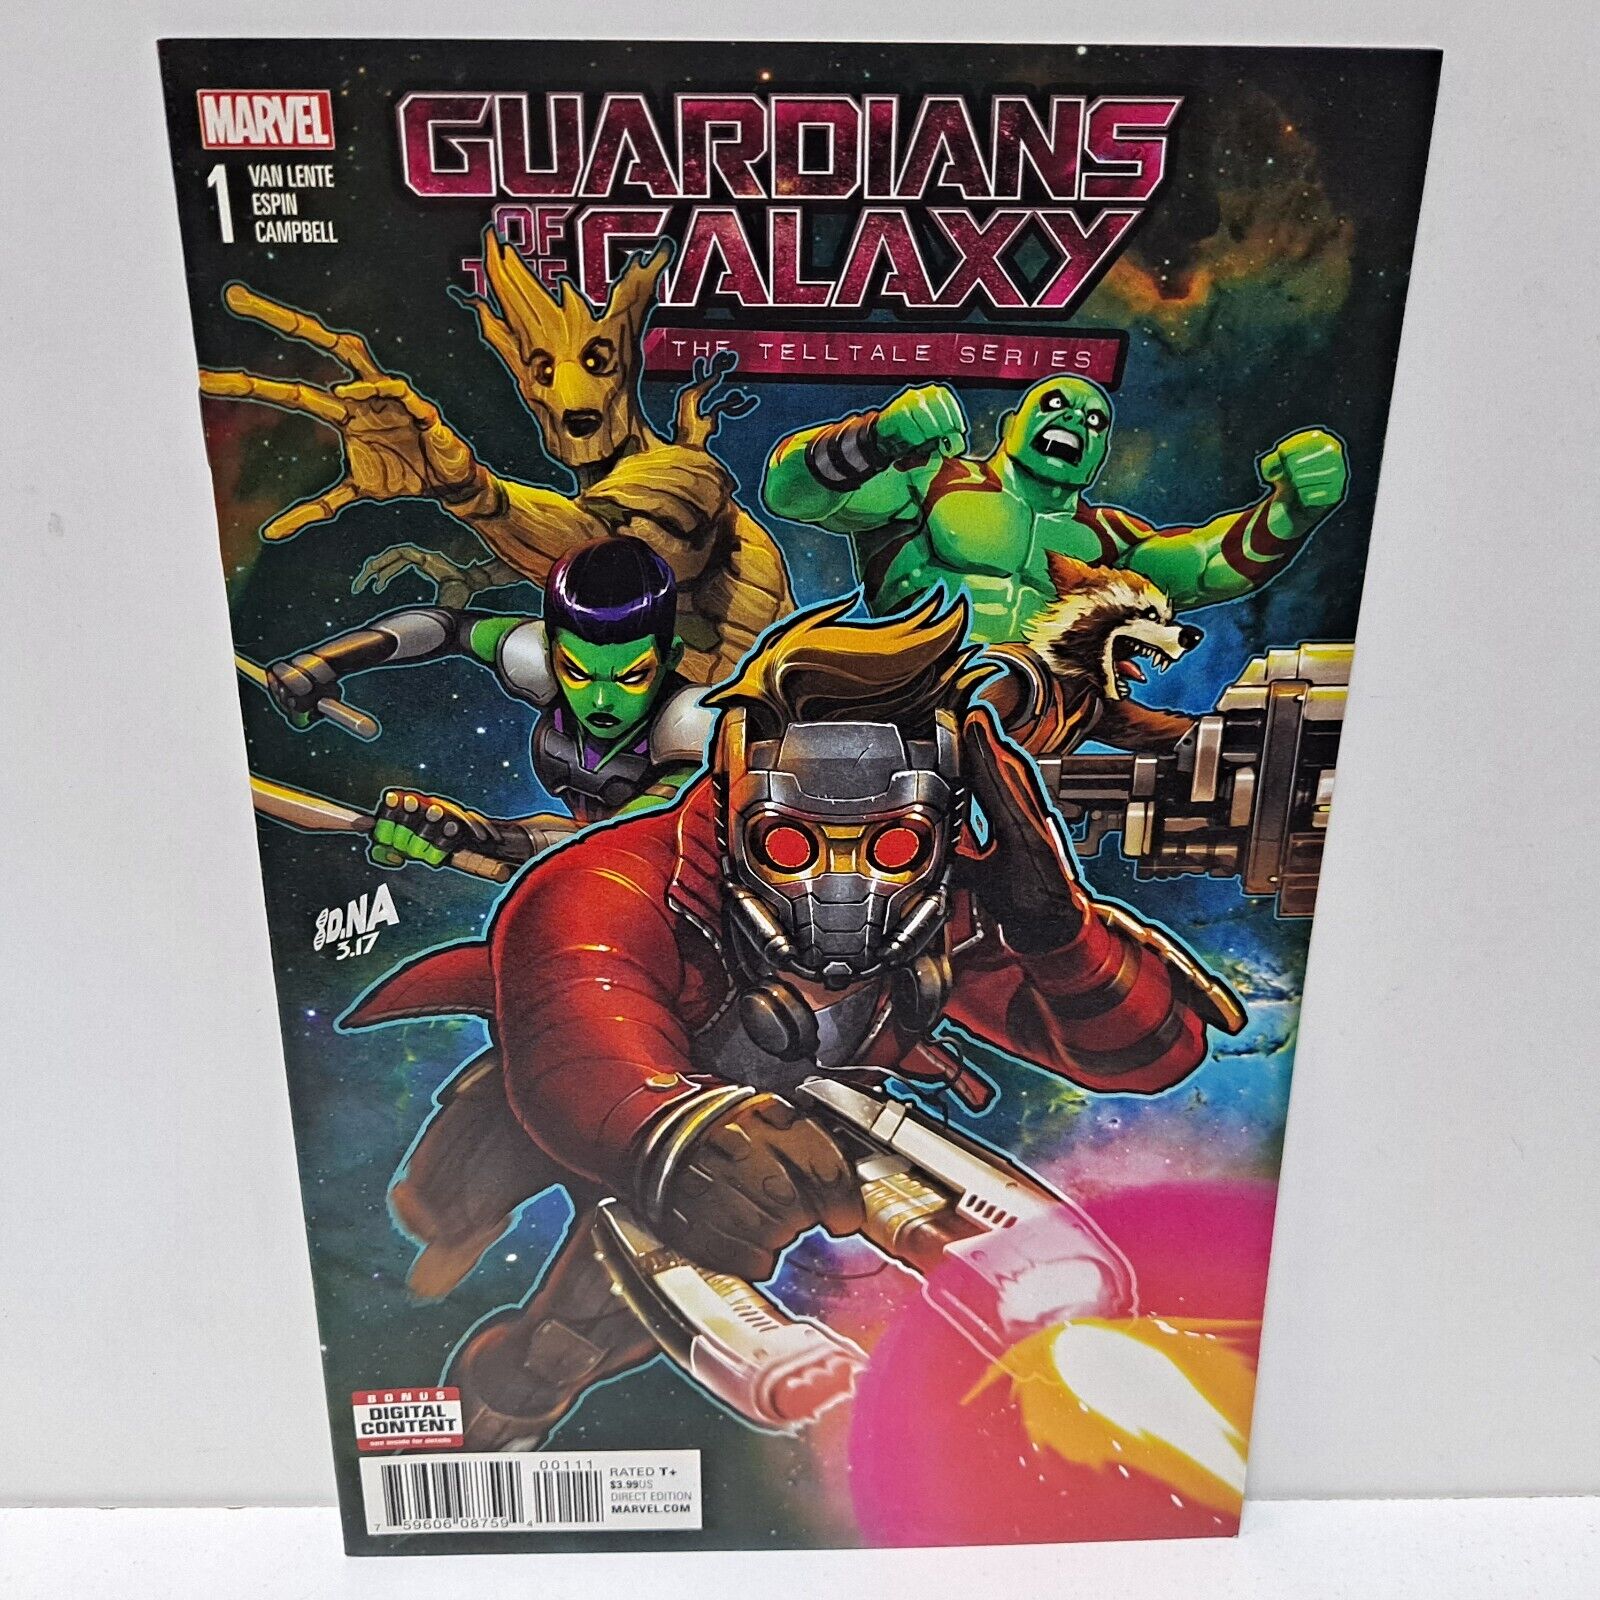 Guardians of the Galaxy The Telltale Games #1 Marvel Comics VF/NM